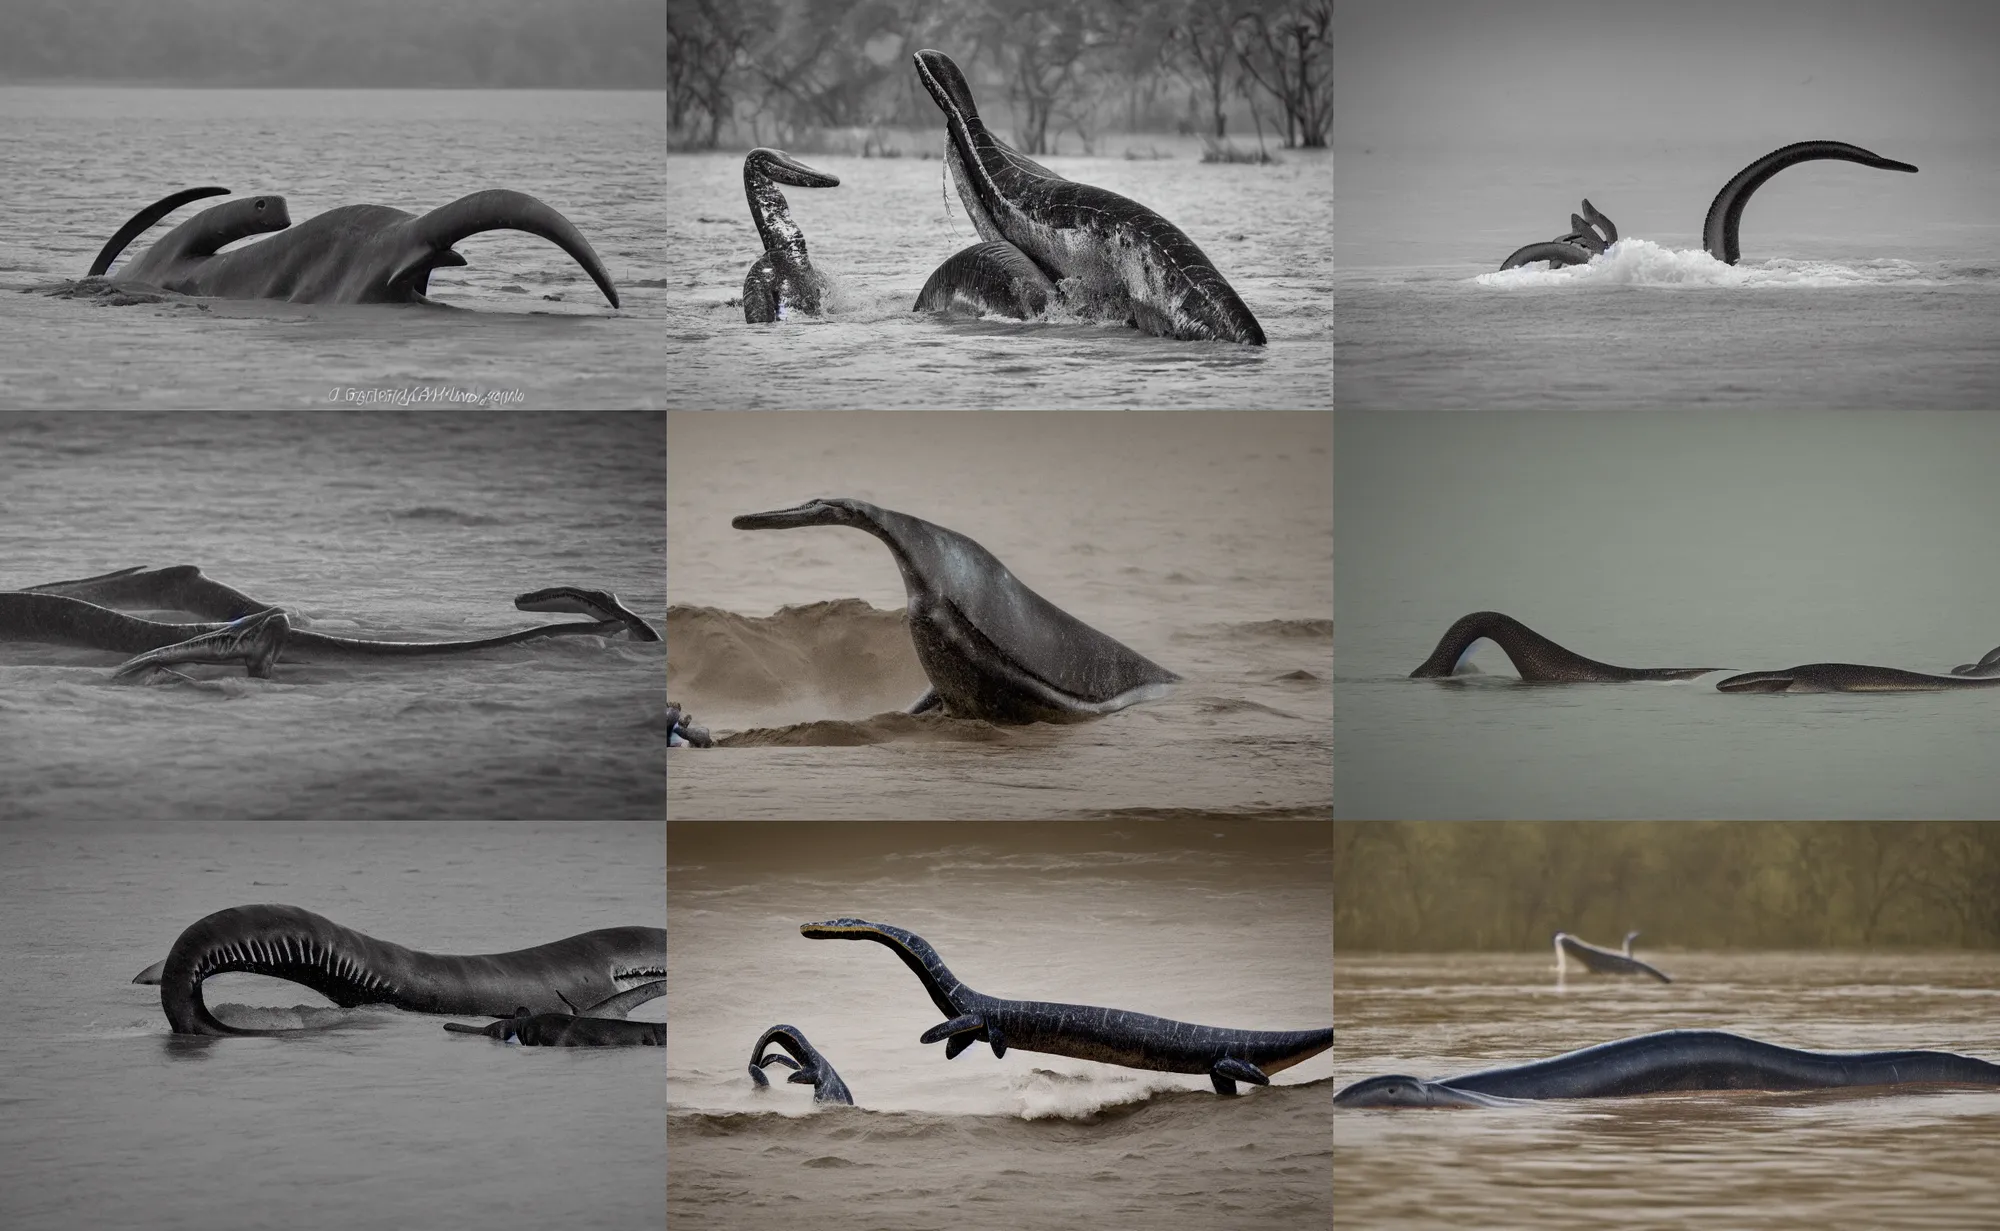 Prompt: nature photography of a plesiosaur and a baby plesiosaur, in flood waters, african savannah, rainfall, muddy embankment, fog, digital photograph, award winning, 5 0 mm, telephoto lens, national geographic, large eyes